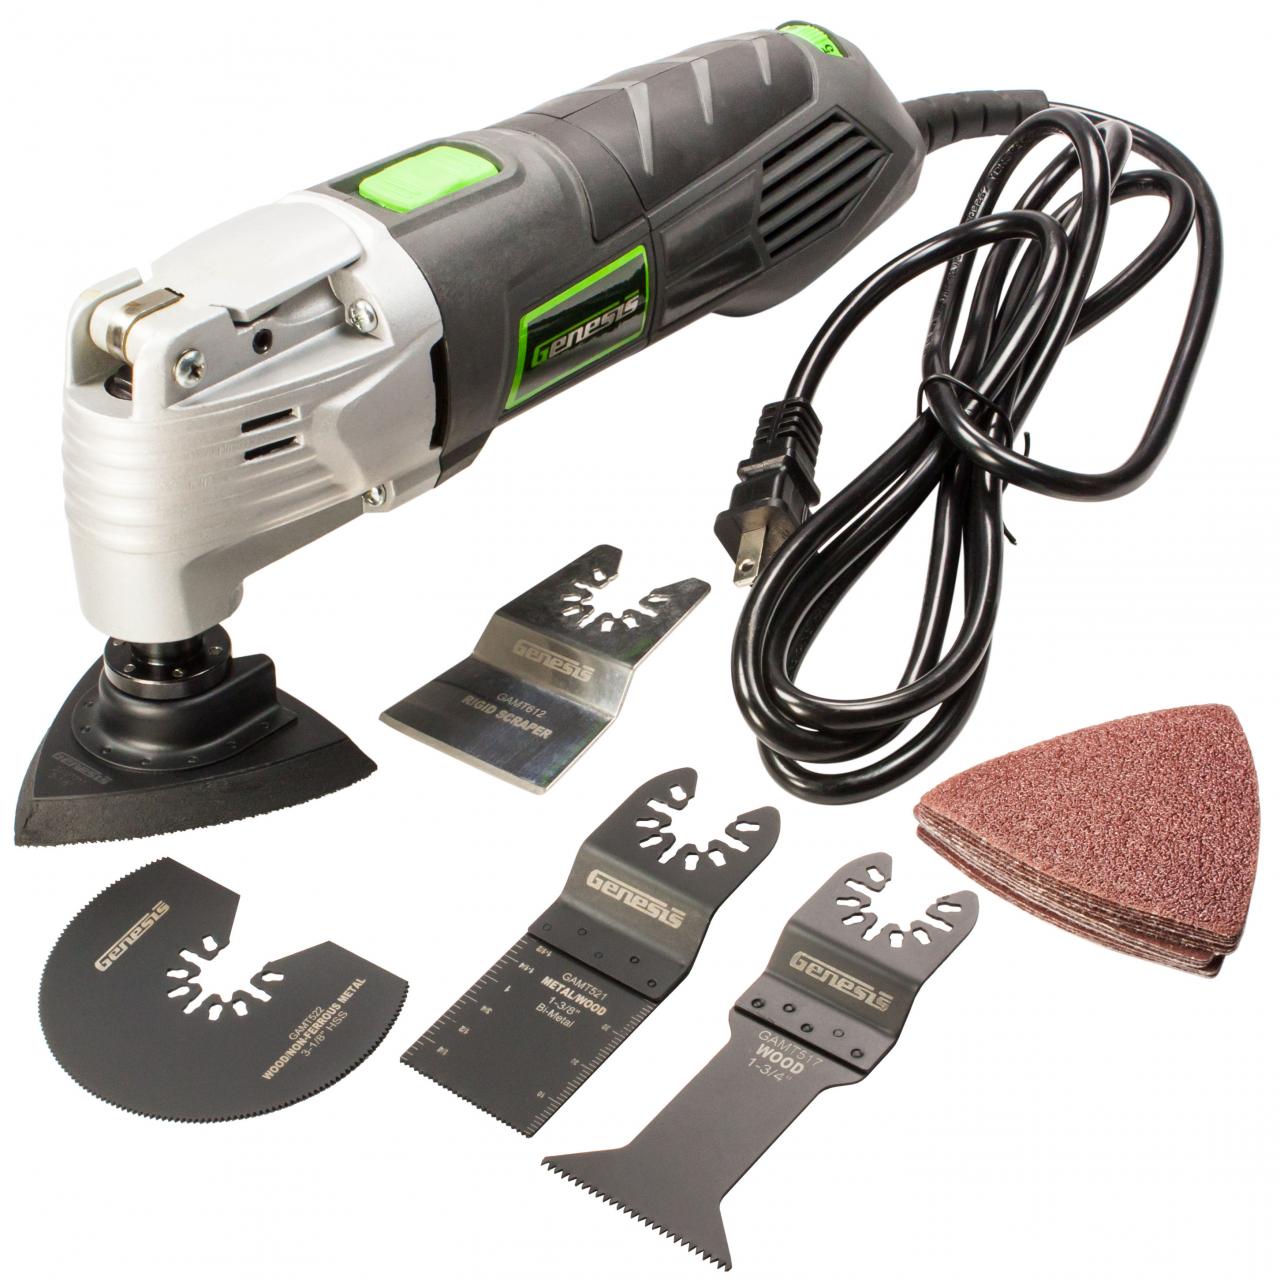 Genesis GMT15A Multi-Purpose Oscillating Tool Review - The Best Oscillating  Tool Choices for 2019 – Reviewed & Buying Guide